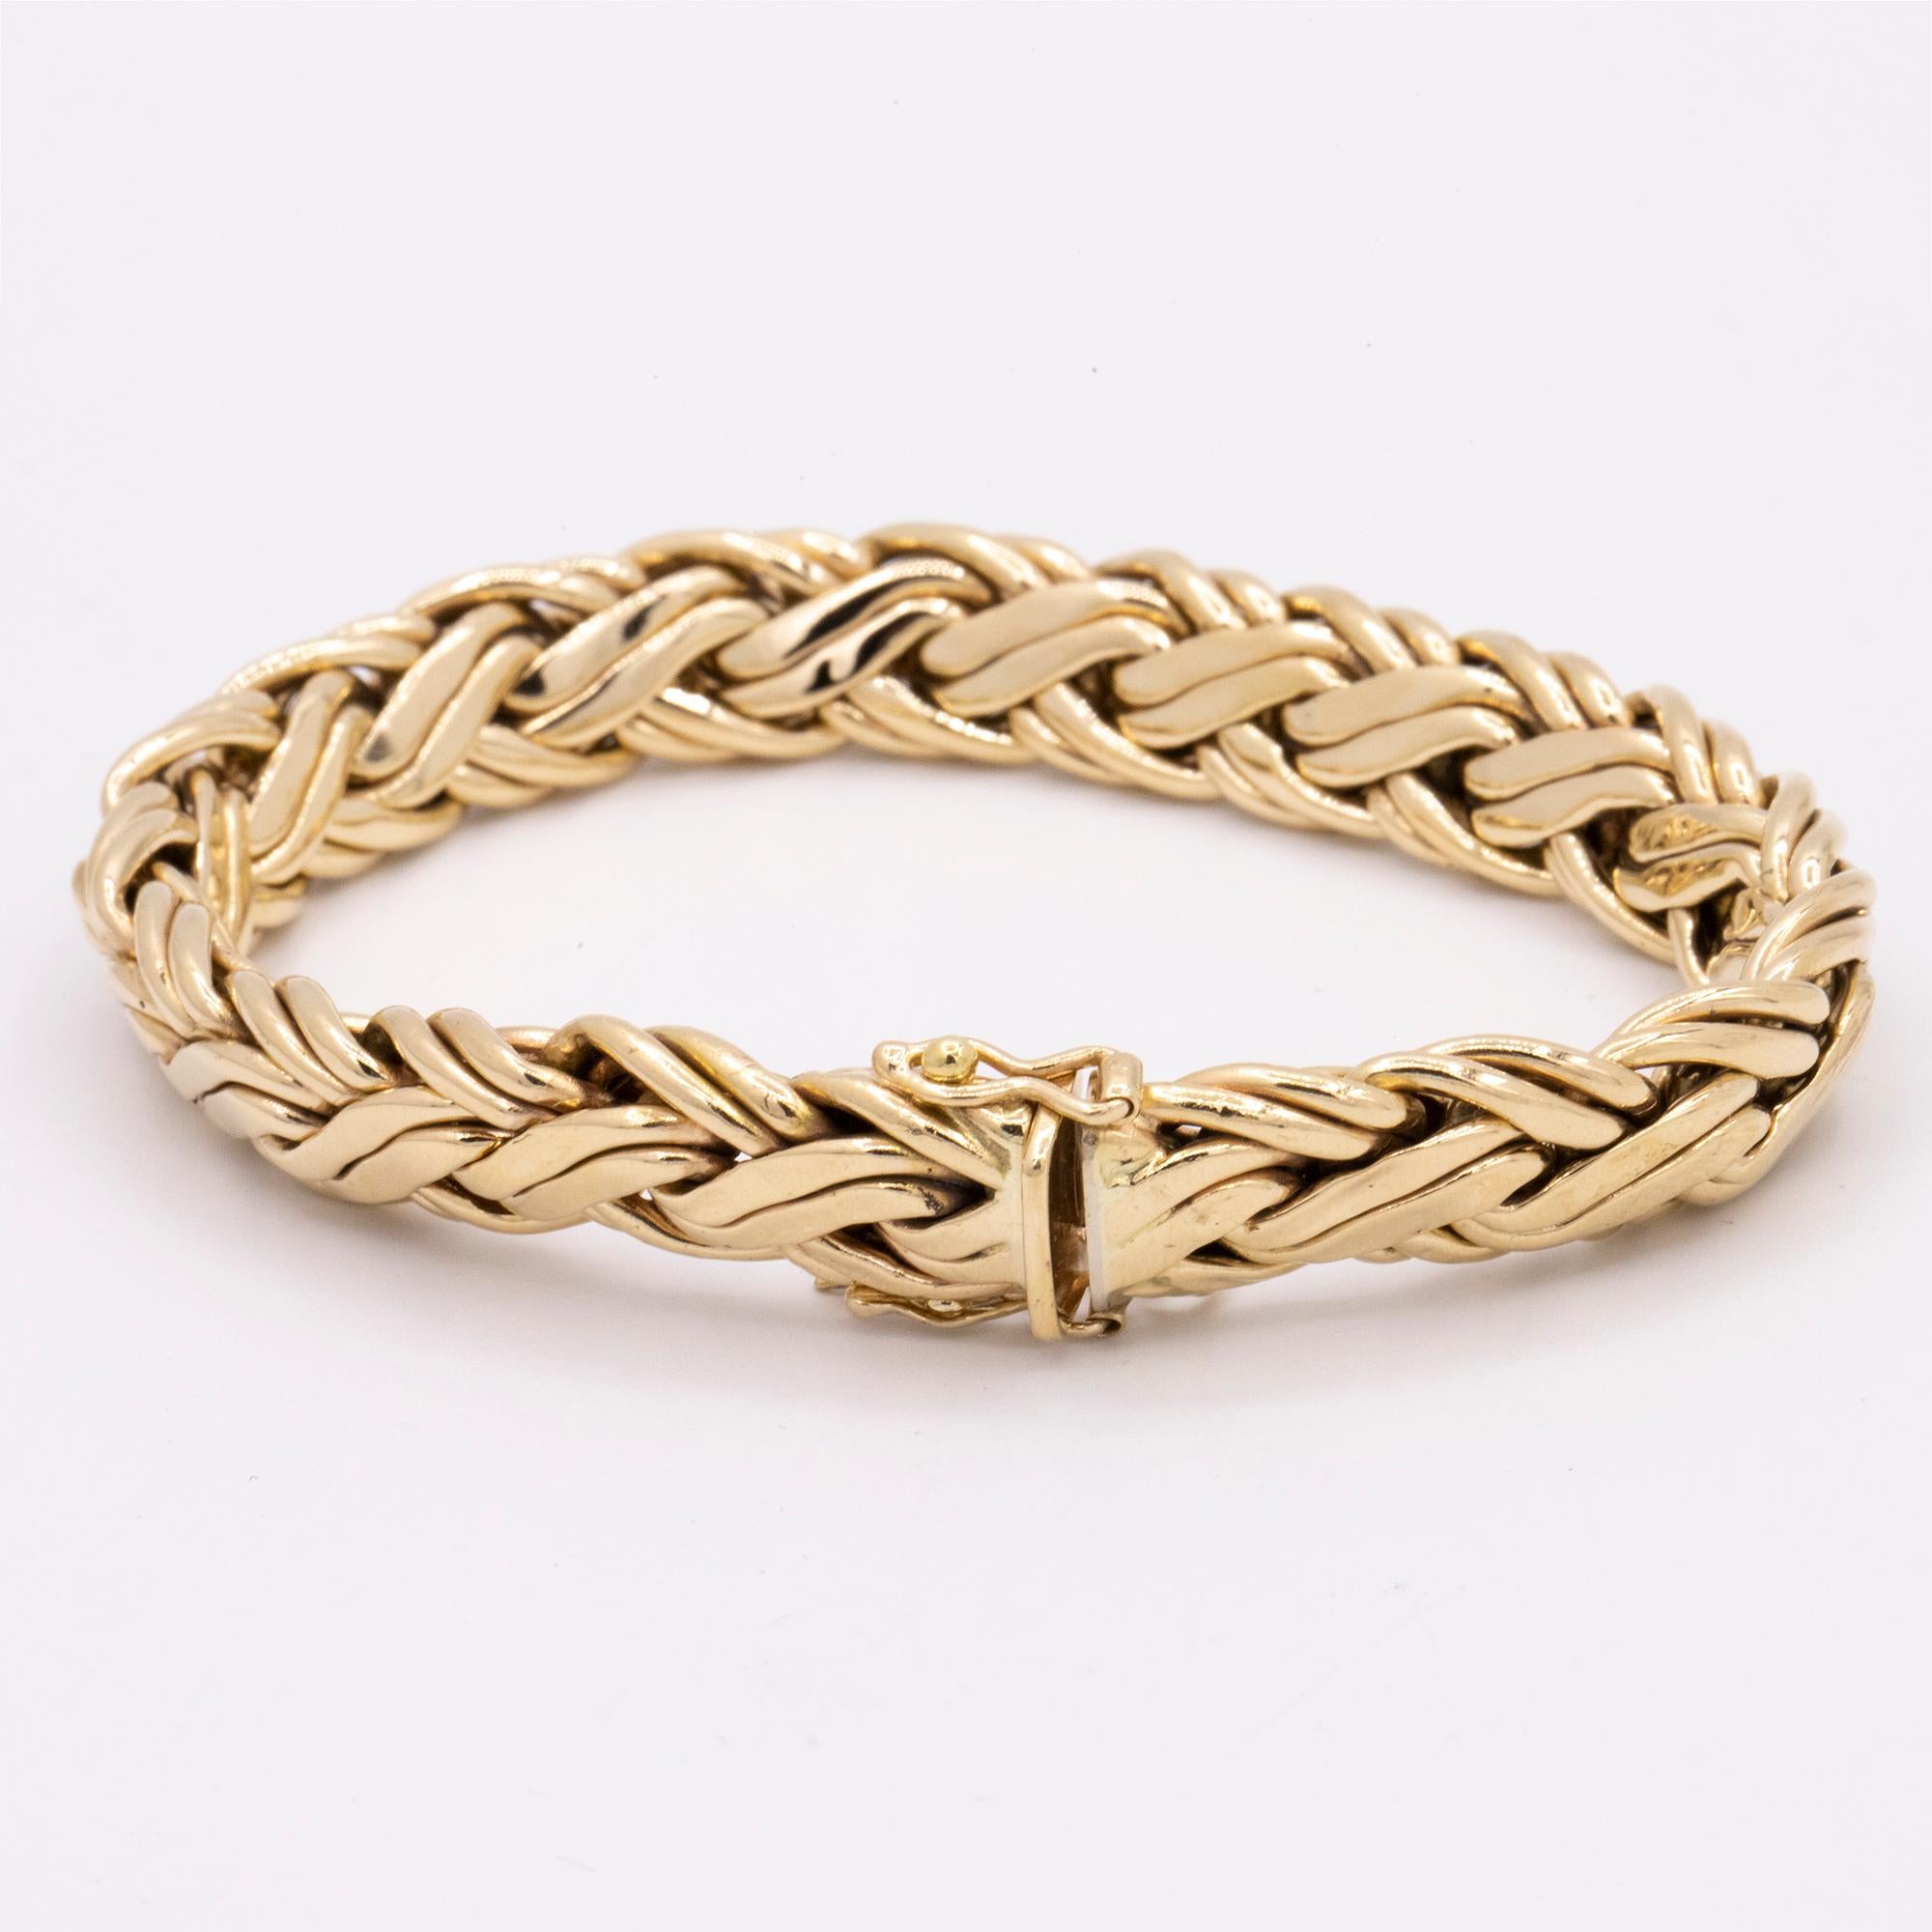 Curated from the master jewelers Tiffany & Co. This vintage woven  bracelet is in mint condition. It is stamped 585 (14kt) and Tffany & Co. It has a total weight of 17.23dwt.

It has been expertly restored by our master jewelers.